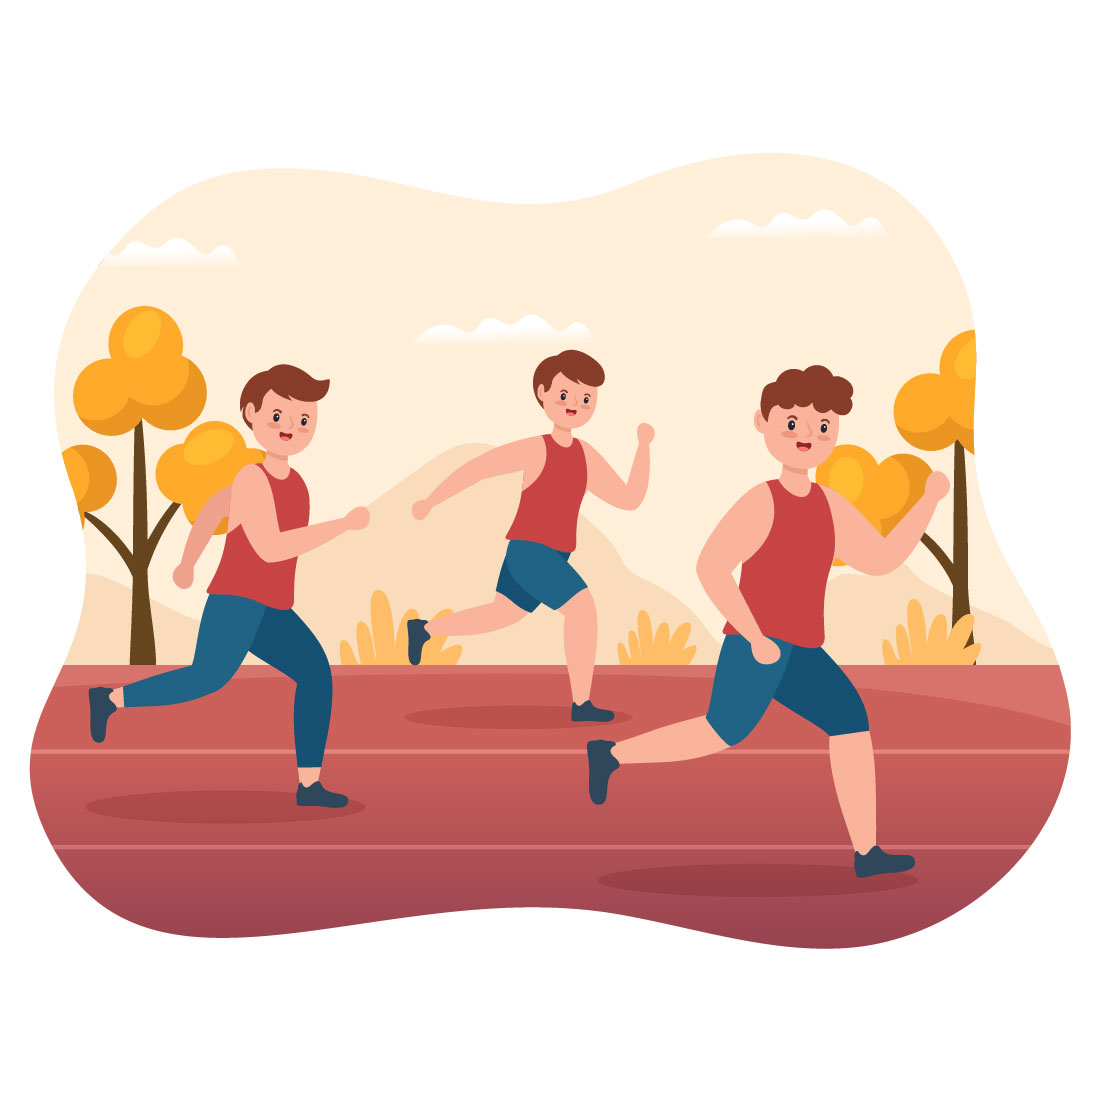 Running Race Flat Graphics cover image.